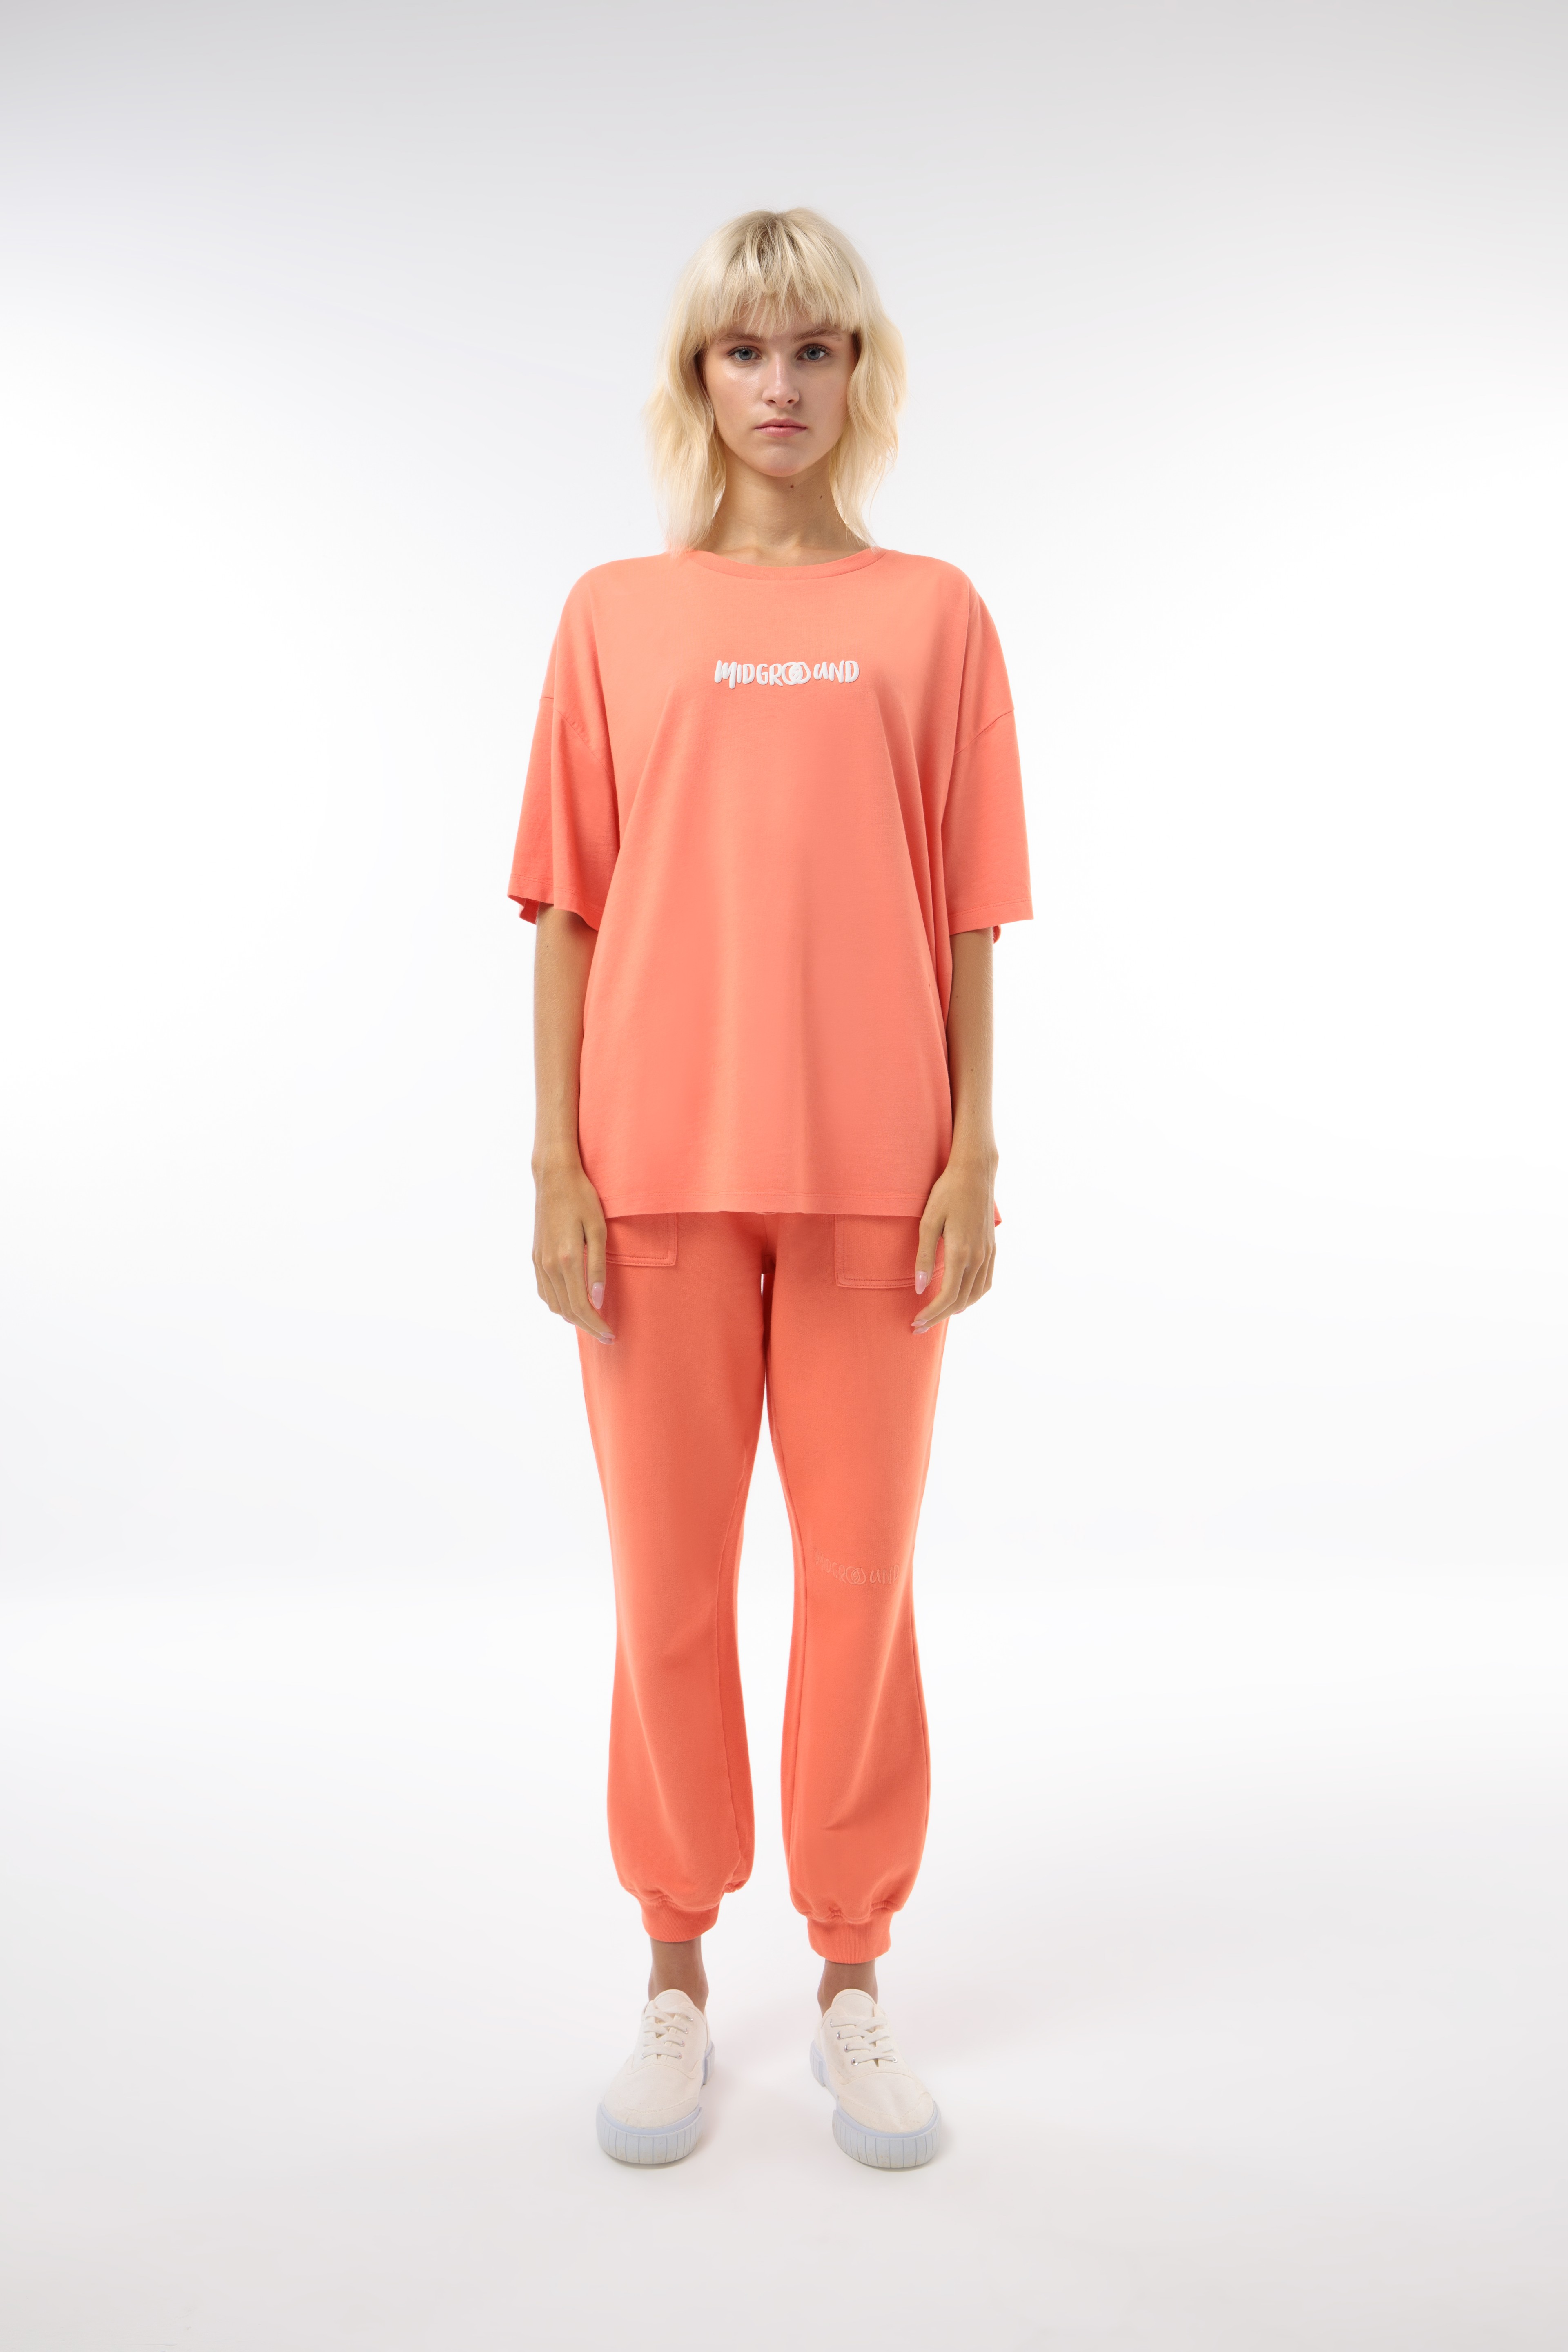 Drop #W027_A Oversized Tee - Coral